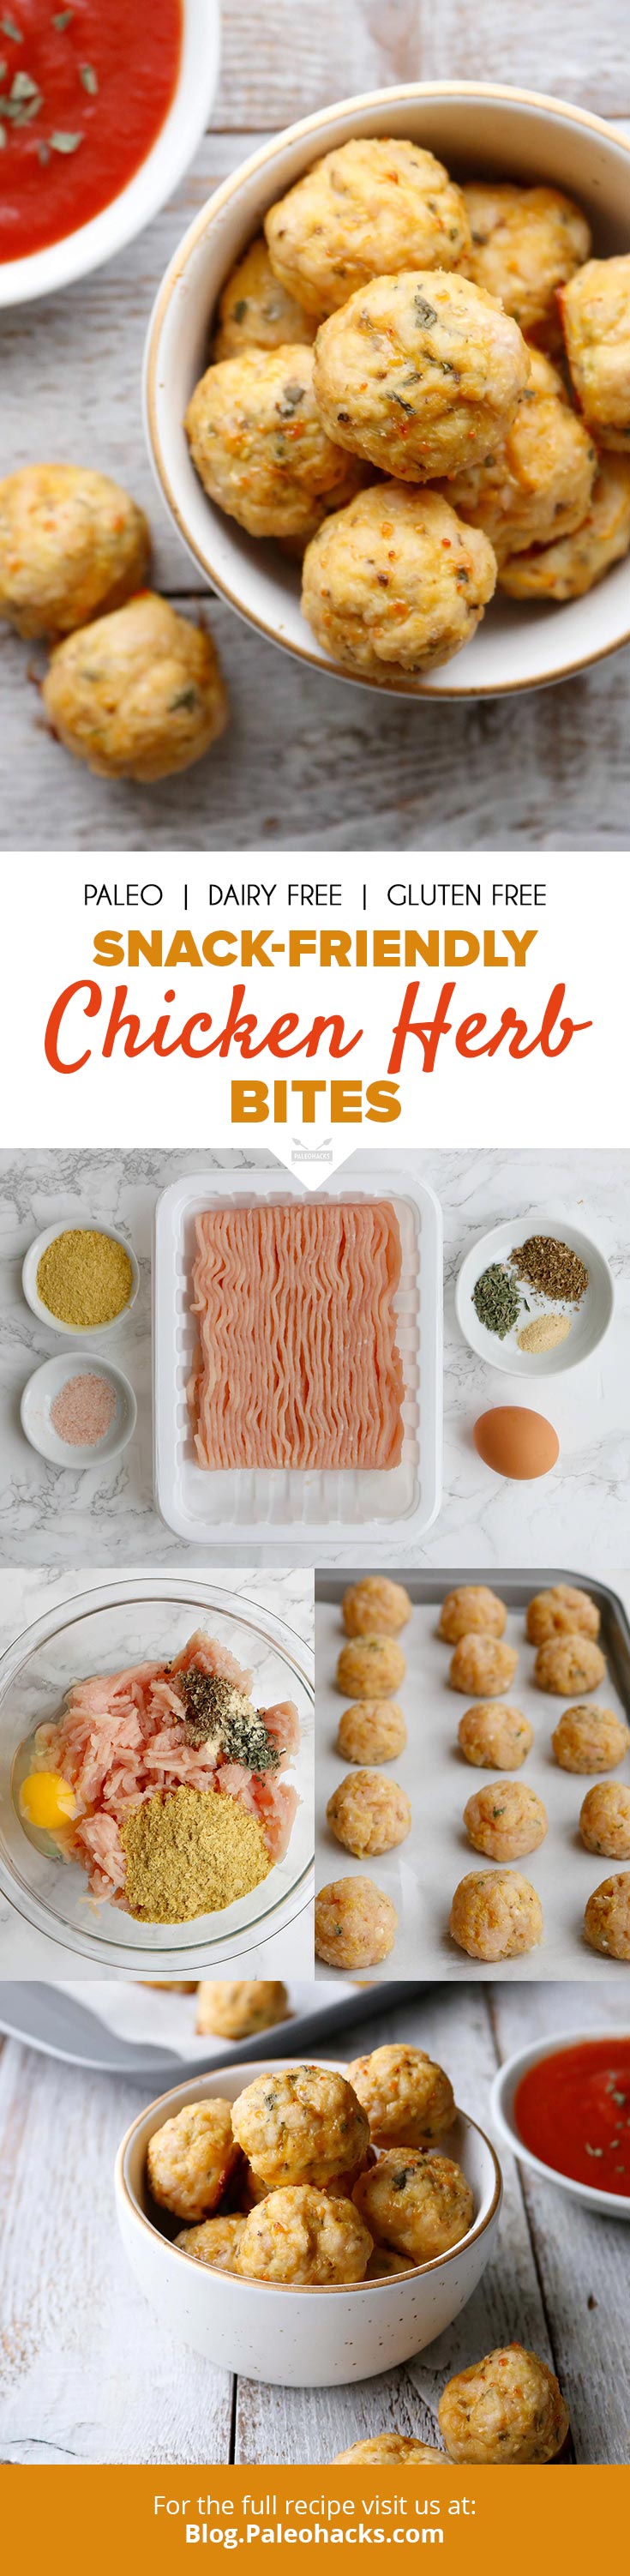 If you’re feeling snacky, whip up a batch of these dairy-free chicken herb bites that smell just like cheddar cheese popcorn.